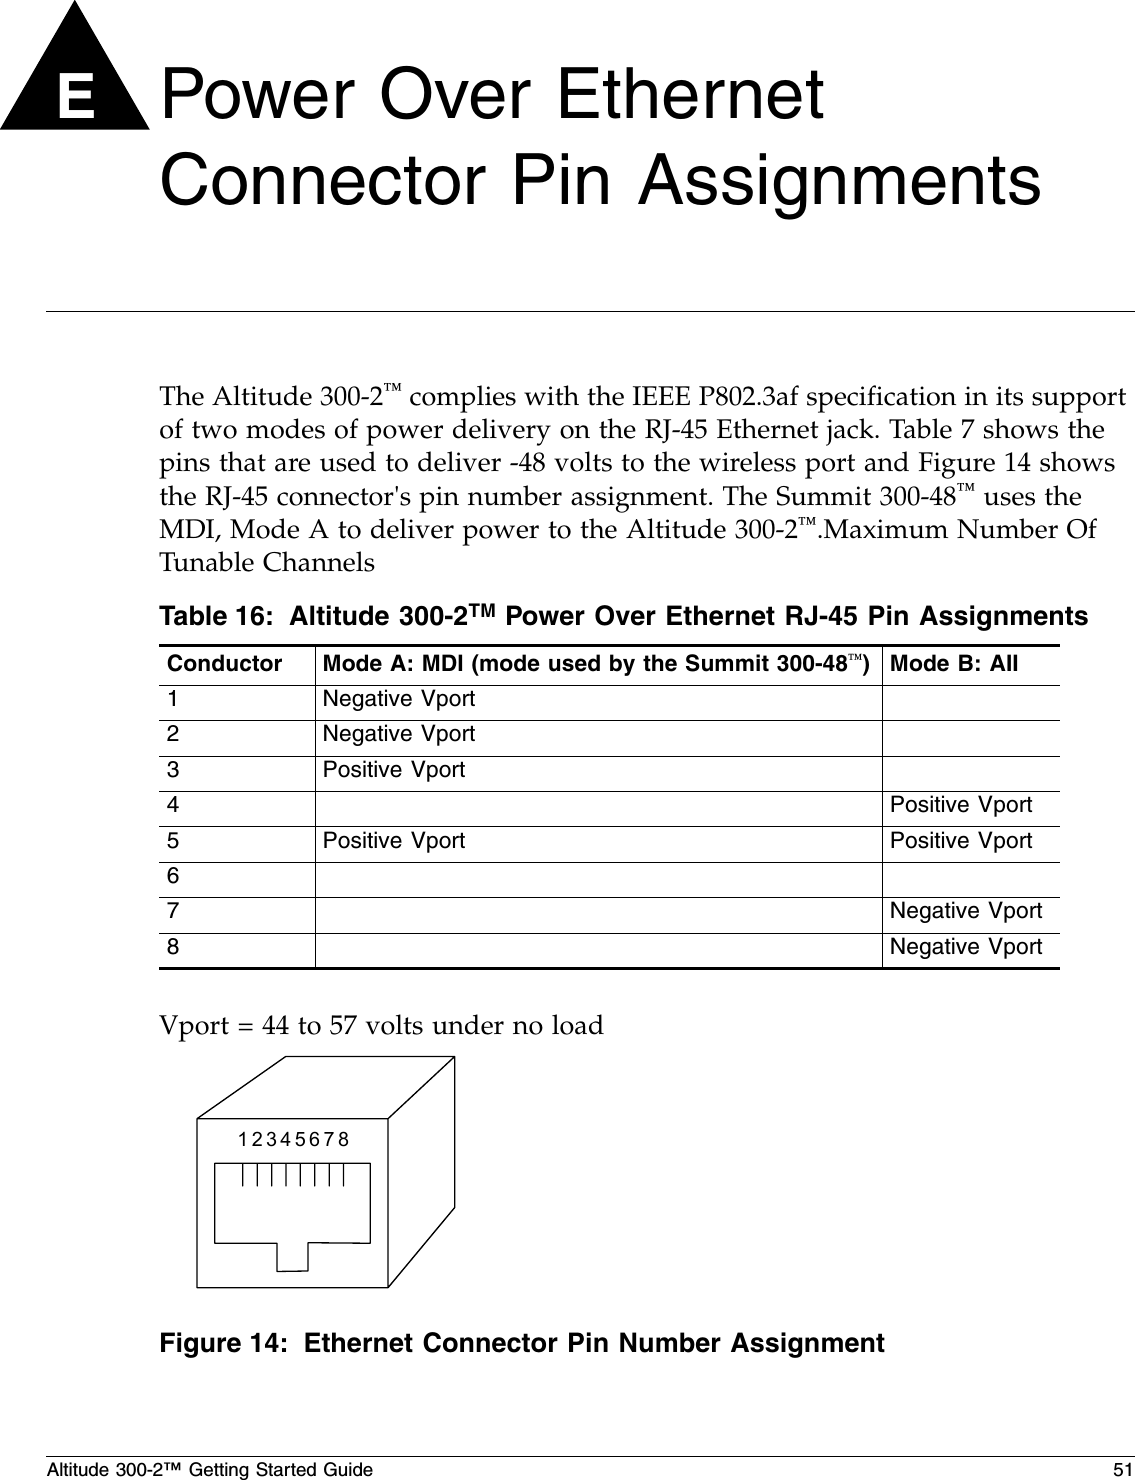 Altitude 300-2™ Getting Started Guide 51EPower Over Ethernet Connector Pin AssignmentsThe Altitude 300-2™ complies with the IEEE P802.3af specification in its support of two modes of power delivery on the RJ-45 Ethernet jack. Table 7 shows the pins that are used to deliver -48 volts to the wireless port and Figure 14 shows the RJ-45 connector&apos;s pin number assignment. The Summit 300-48™ uses the MDI, Mode A to deliver power to the Altitude 300-2™.Maximum Number Of Tunable ChannelsVport = 44 to 57 volts under no loadFigure 14: Ethernet Connector Pin Number AssignmentTable 16: Altitude 300-2TM Power Over Ethernet RJ-45 Pin AssignmentsConductor Mode A: MDI (mode used by the Summit 300-48™)Mode B: AII1Negative Vport2Negative Vport3Positive Vport4Positive Vport5Positive Vport Positive Vport67Negative Vport8Negative Vport23456781